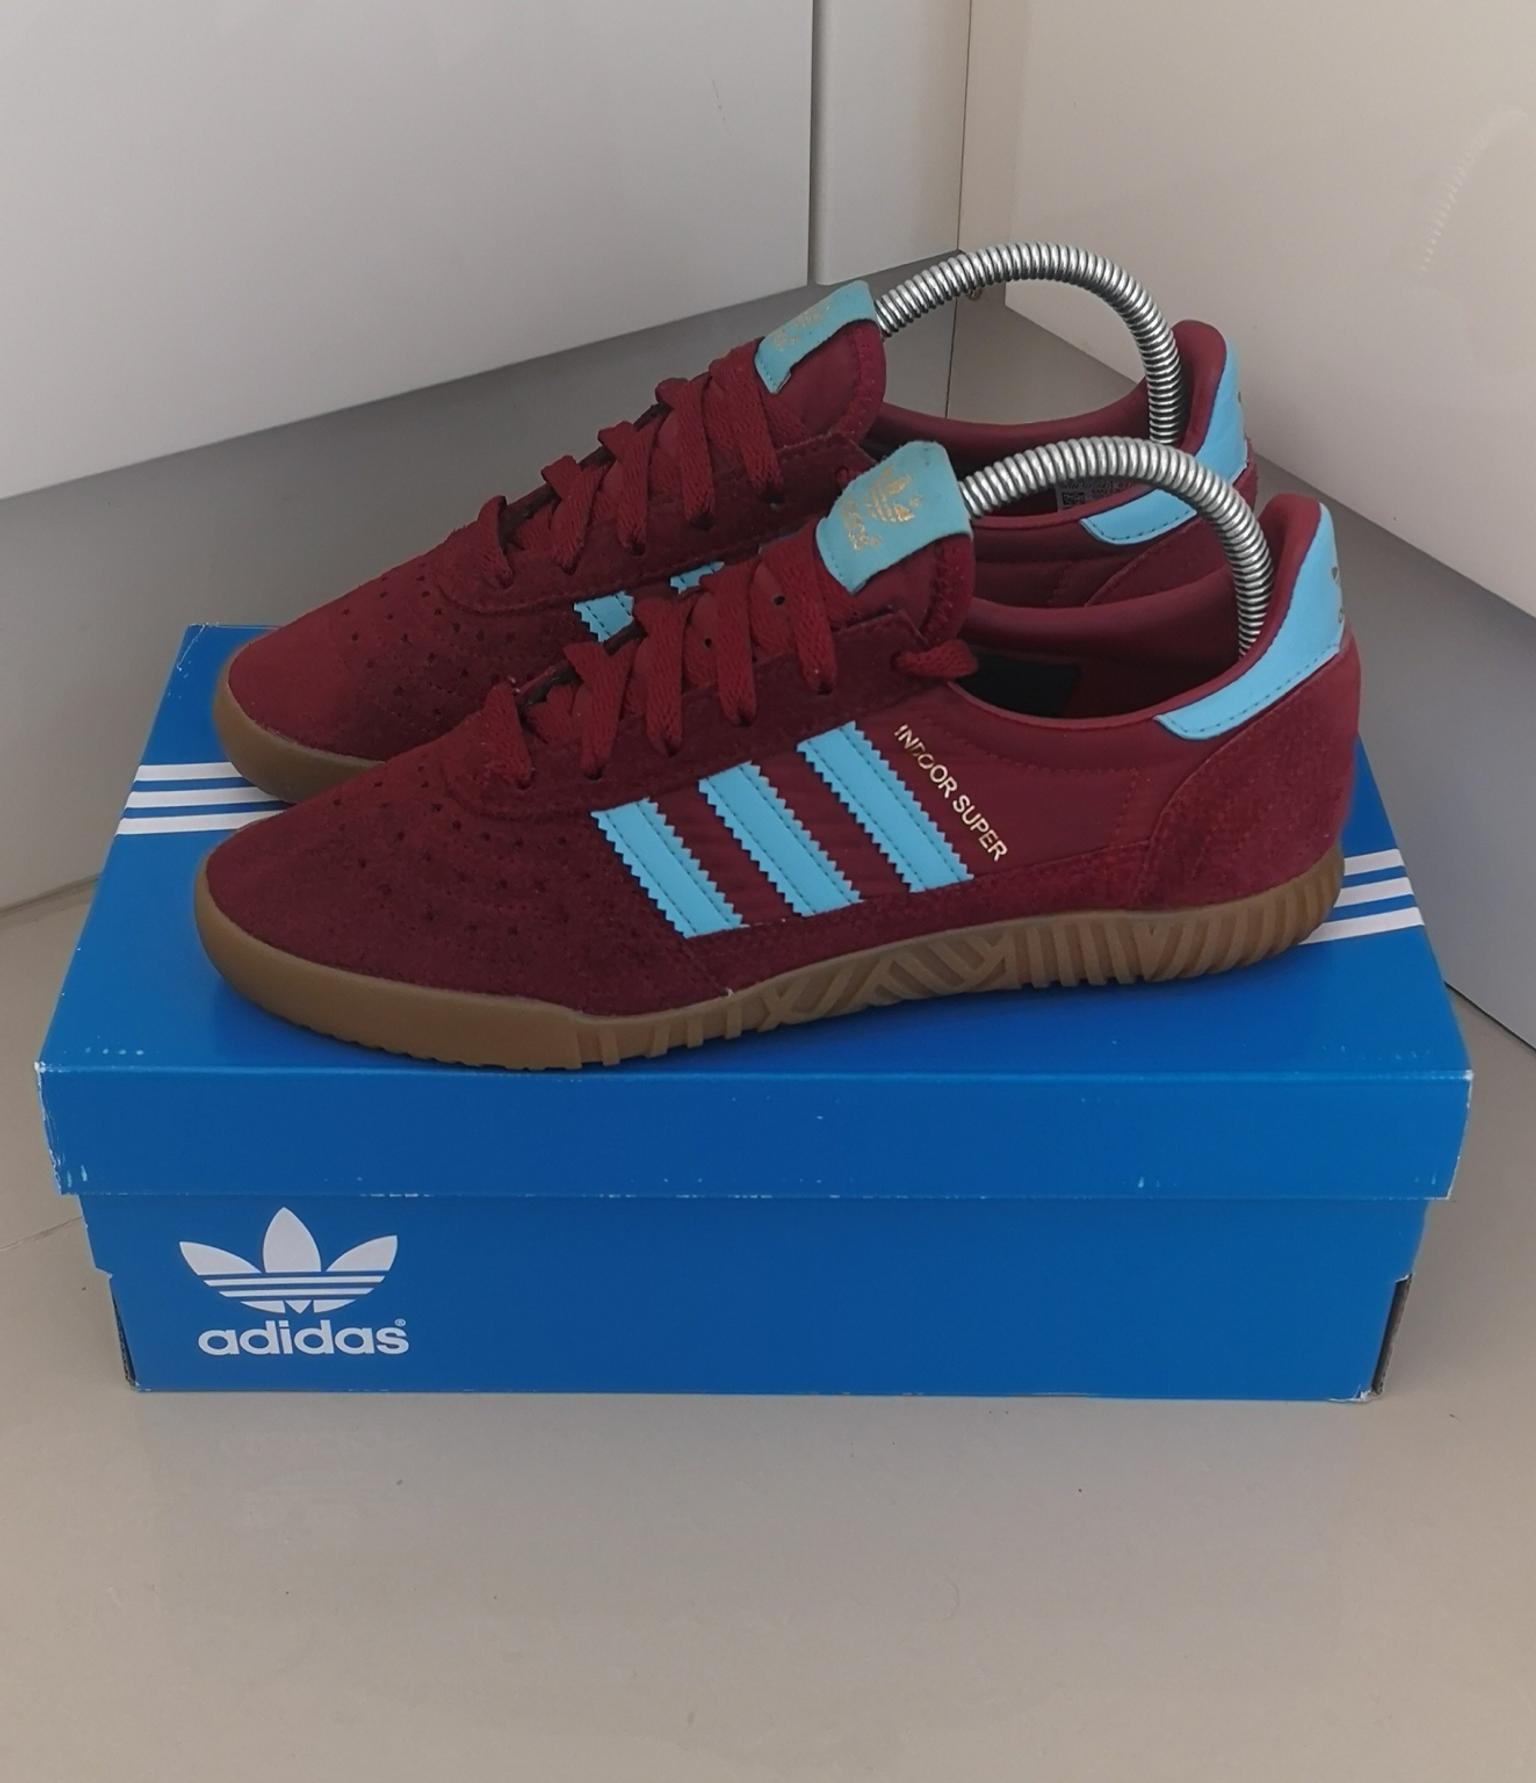 adidas jeans claret and blue trainers 